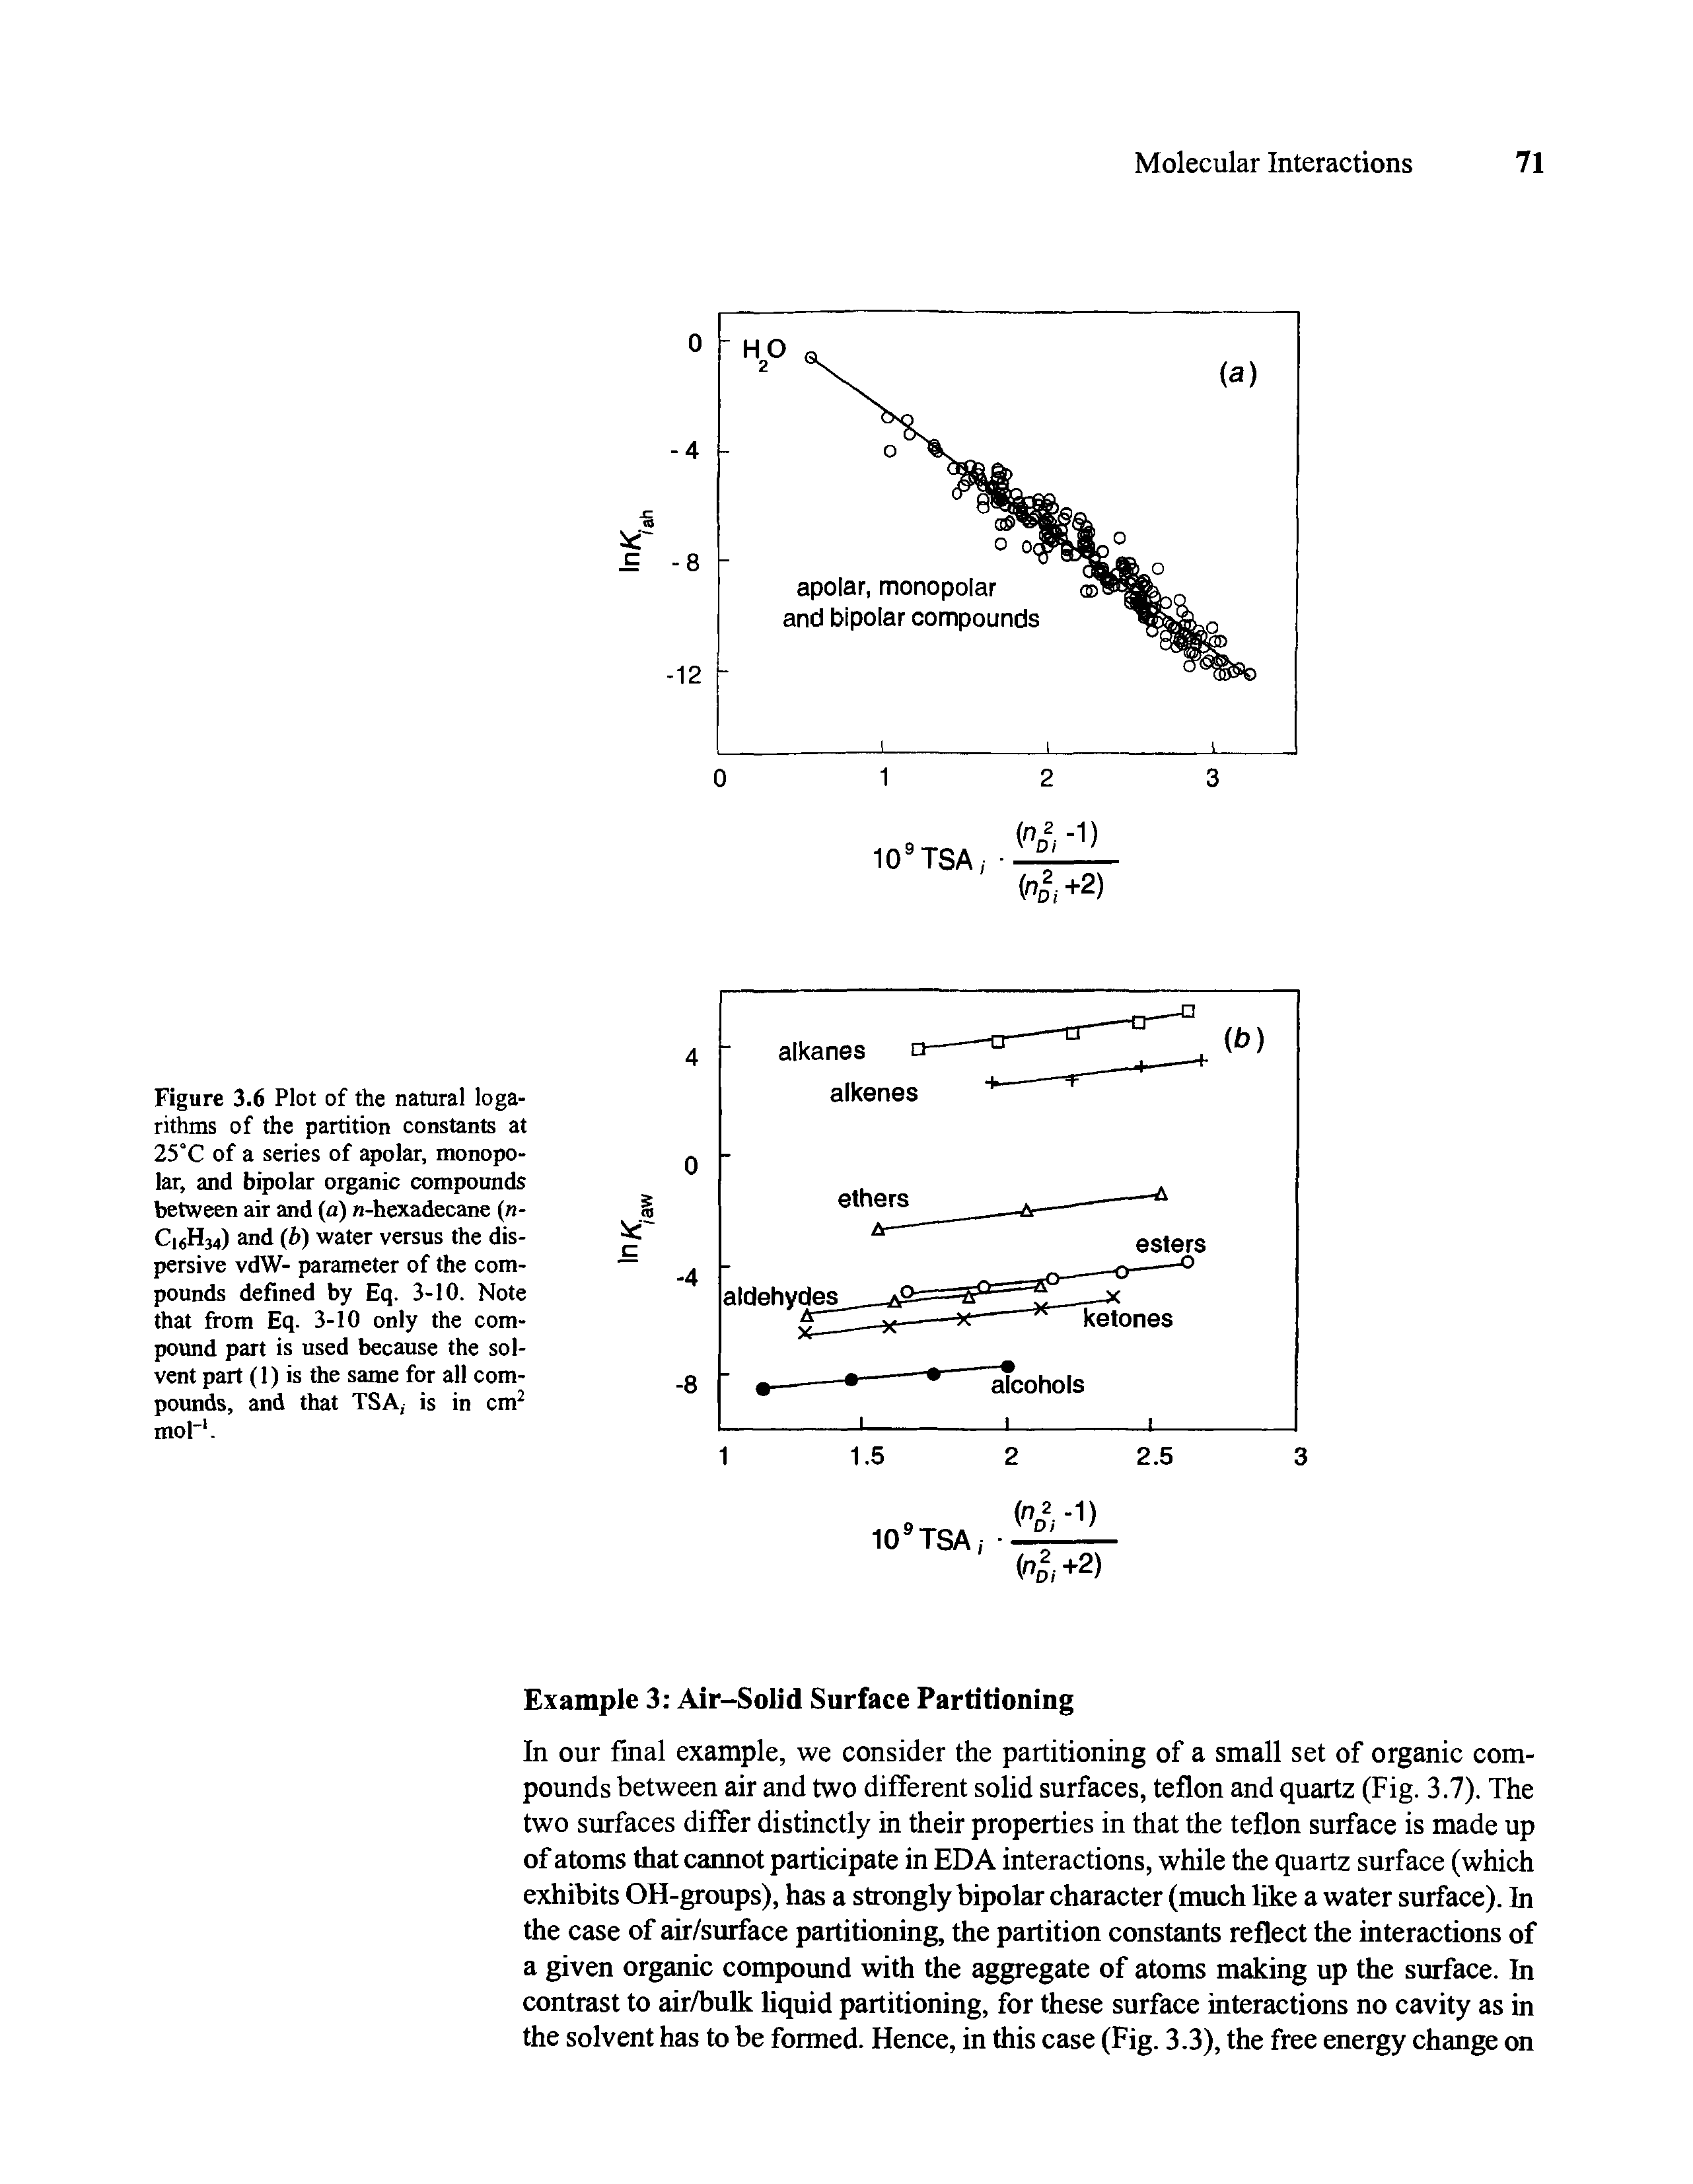 Figure 3.6 Plot of the natural logarithms of the partition constants at 25°C of a series of apolar, monopolar, and bipolar organic compounds between air and (a) n-hexadecane (n-C H34) and (b) water versus the dispersive vdW- parameter of the compounds defined by Eq. 3-10. Note that from Eq. 3-10 only the compound part is used because the solvent part (1) is the same for all compounds, and that TSA, is in cm2 mol-1.